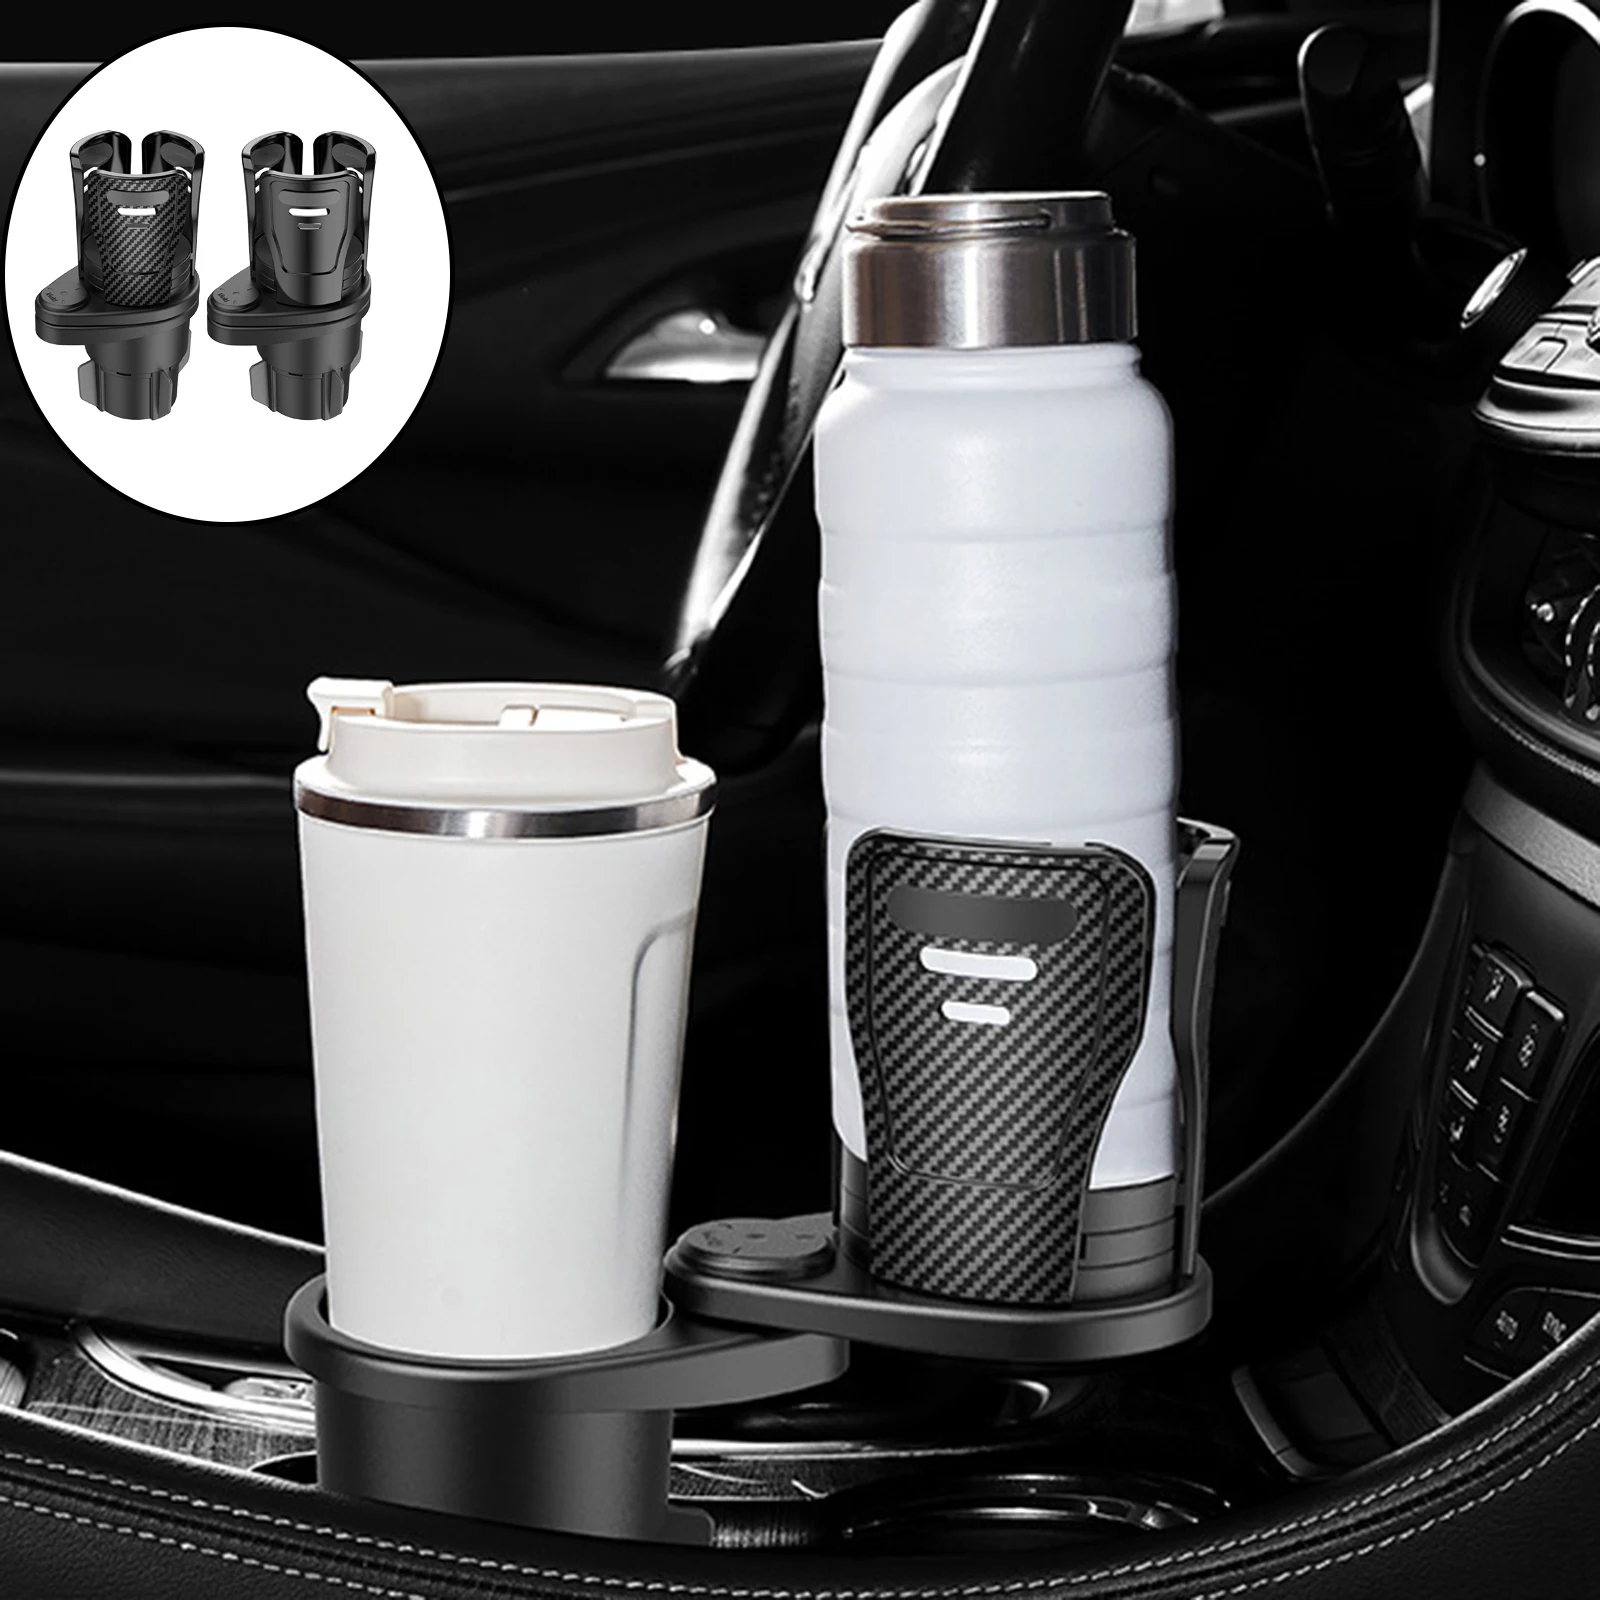 Car Cup Holder 360 Rotating Multifunctional Adjustable Base Bottle Organizers Coffee Drinks Storage Rack Stable for Most Cup